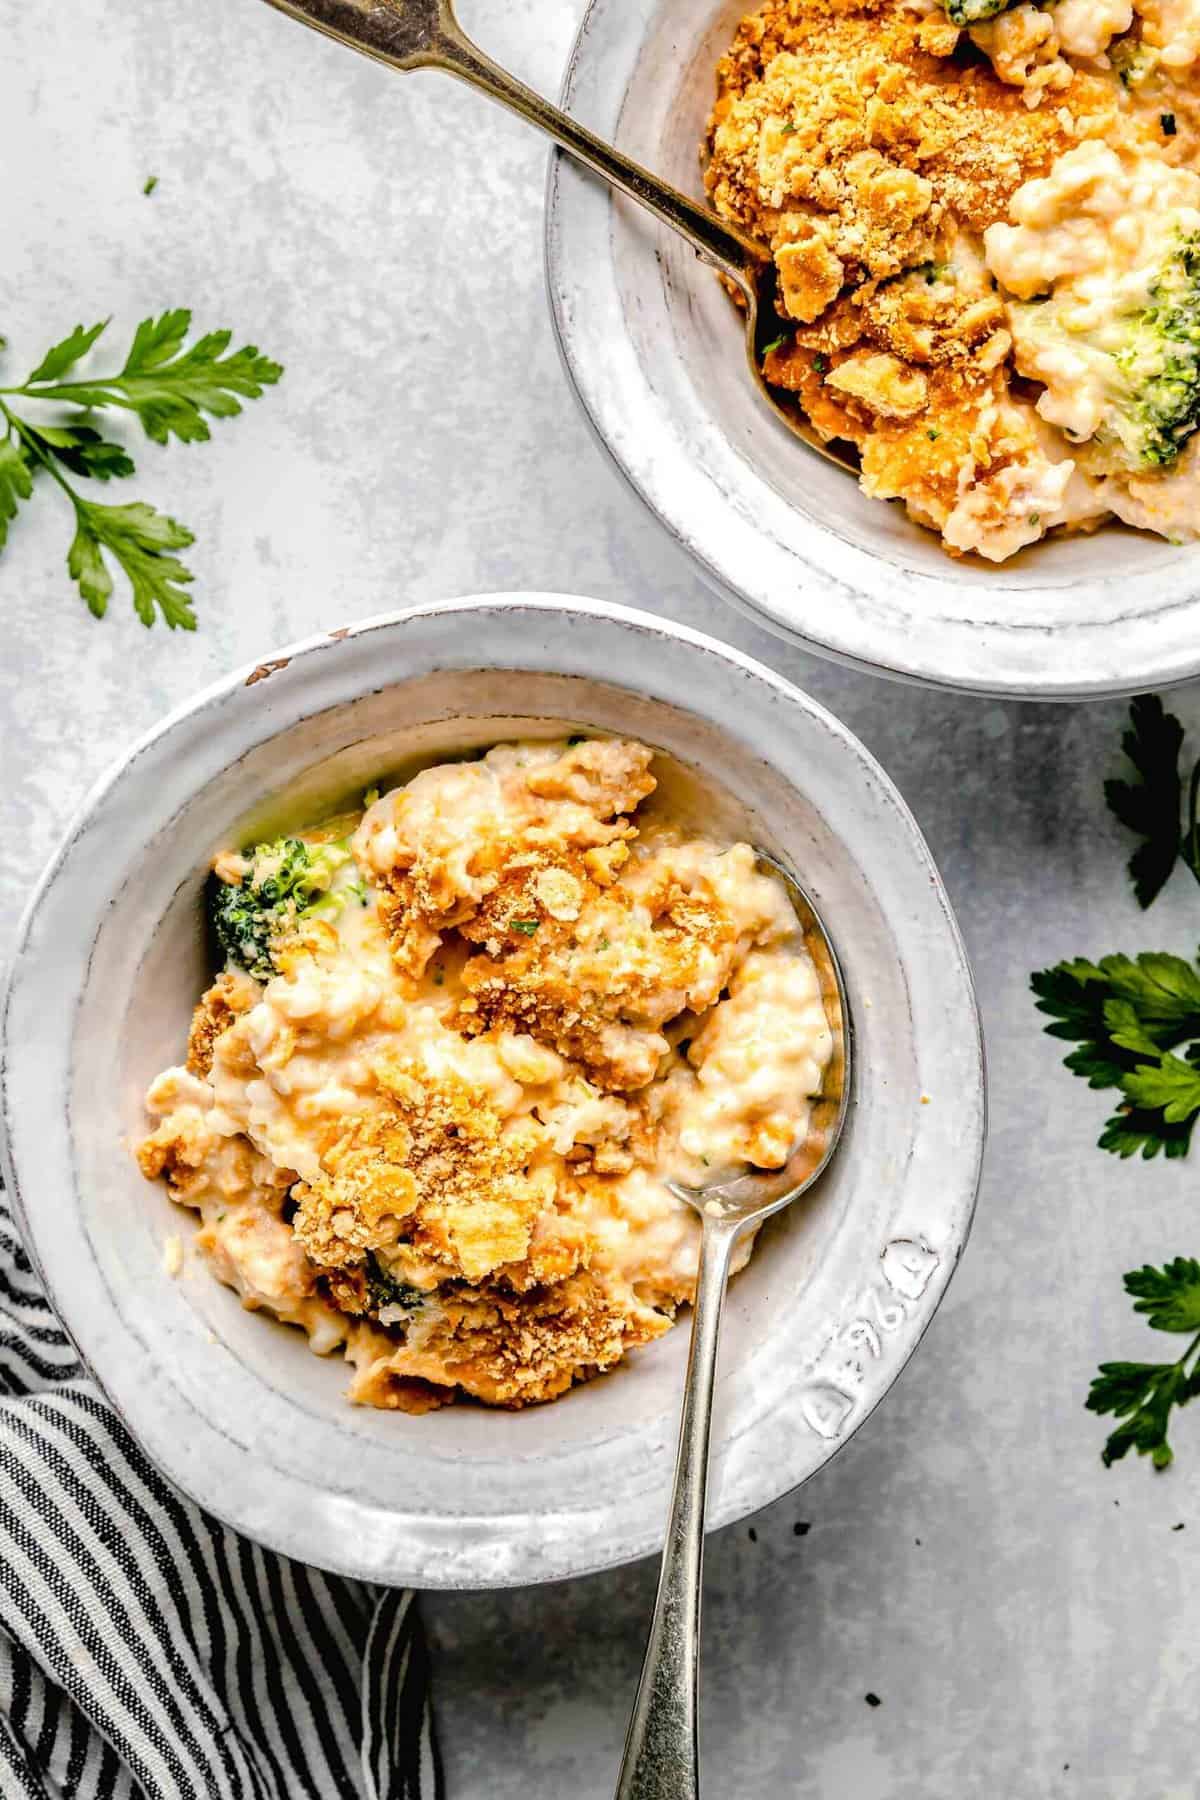 Chicken broccoli rice casserole served in bowls with spoons.